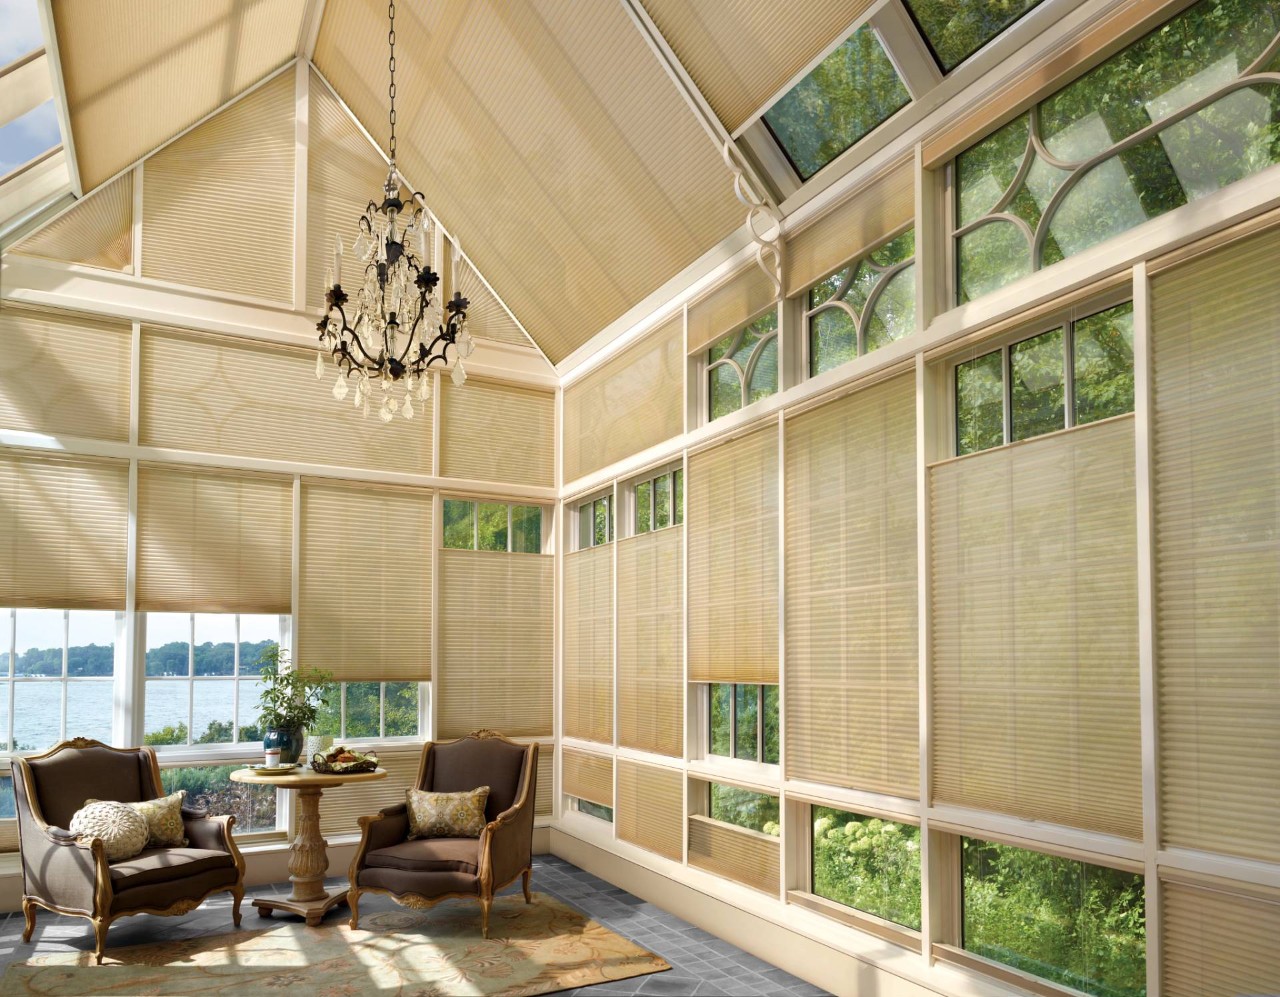 We discuss what you should know when adding skylight shades to your home. Contact us near Wichita, KS, for Hunter Douglas window treatments.